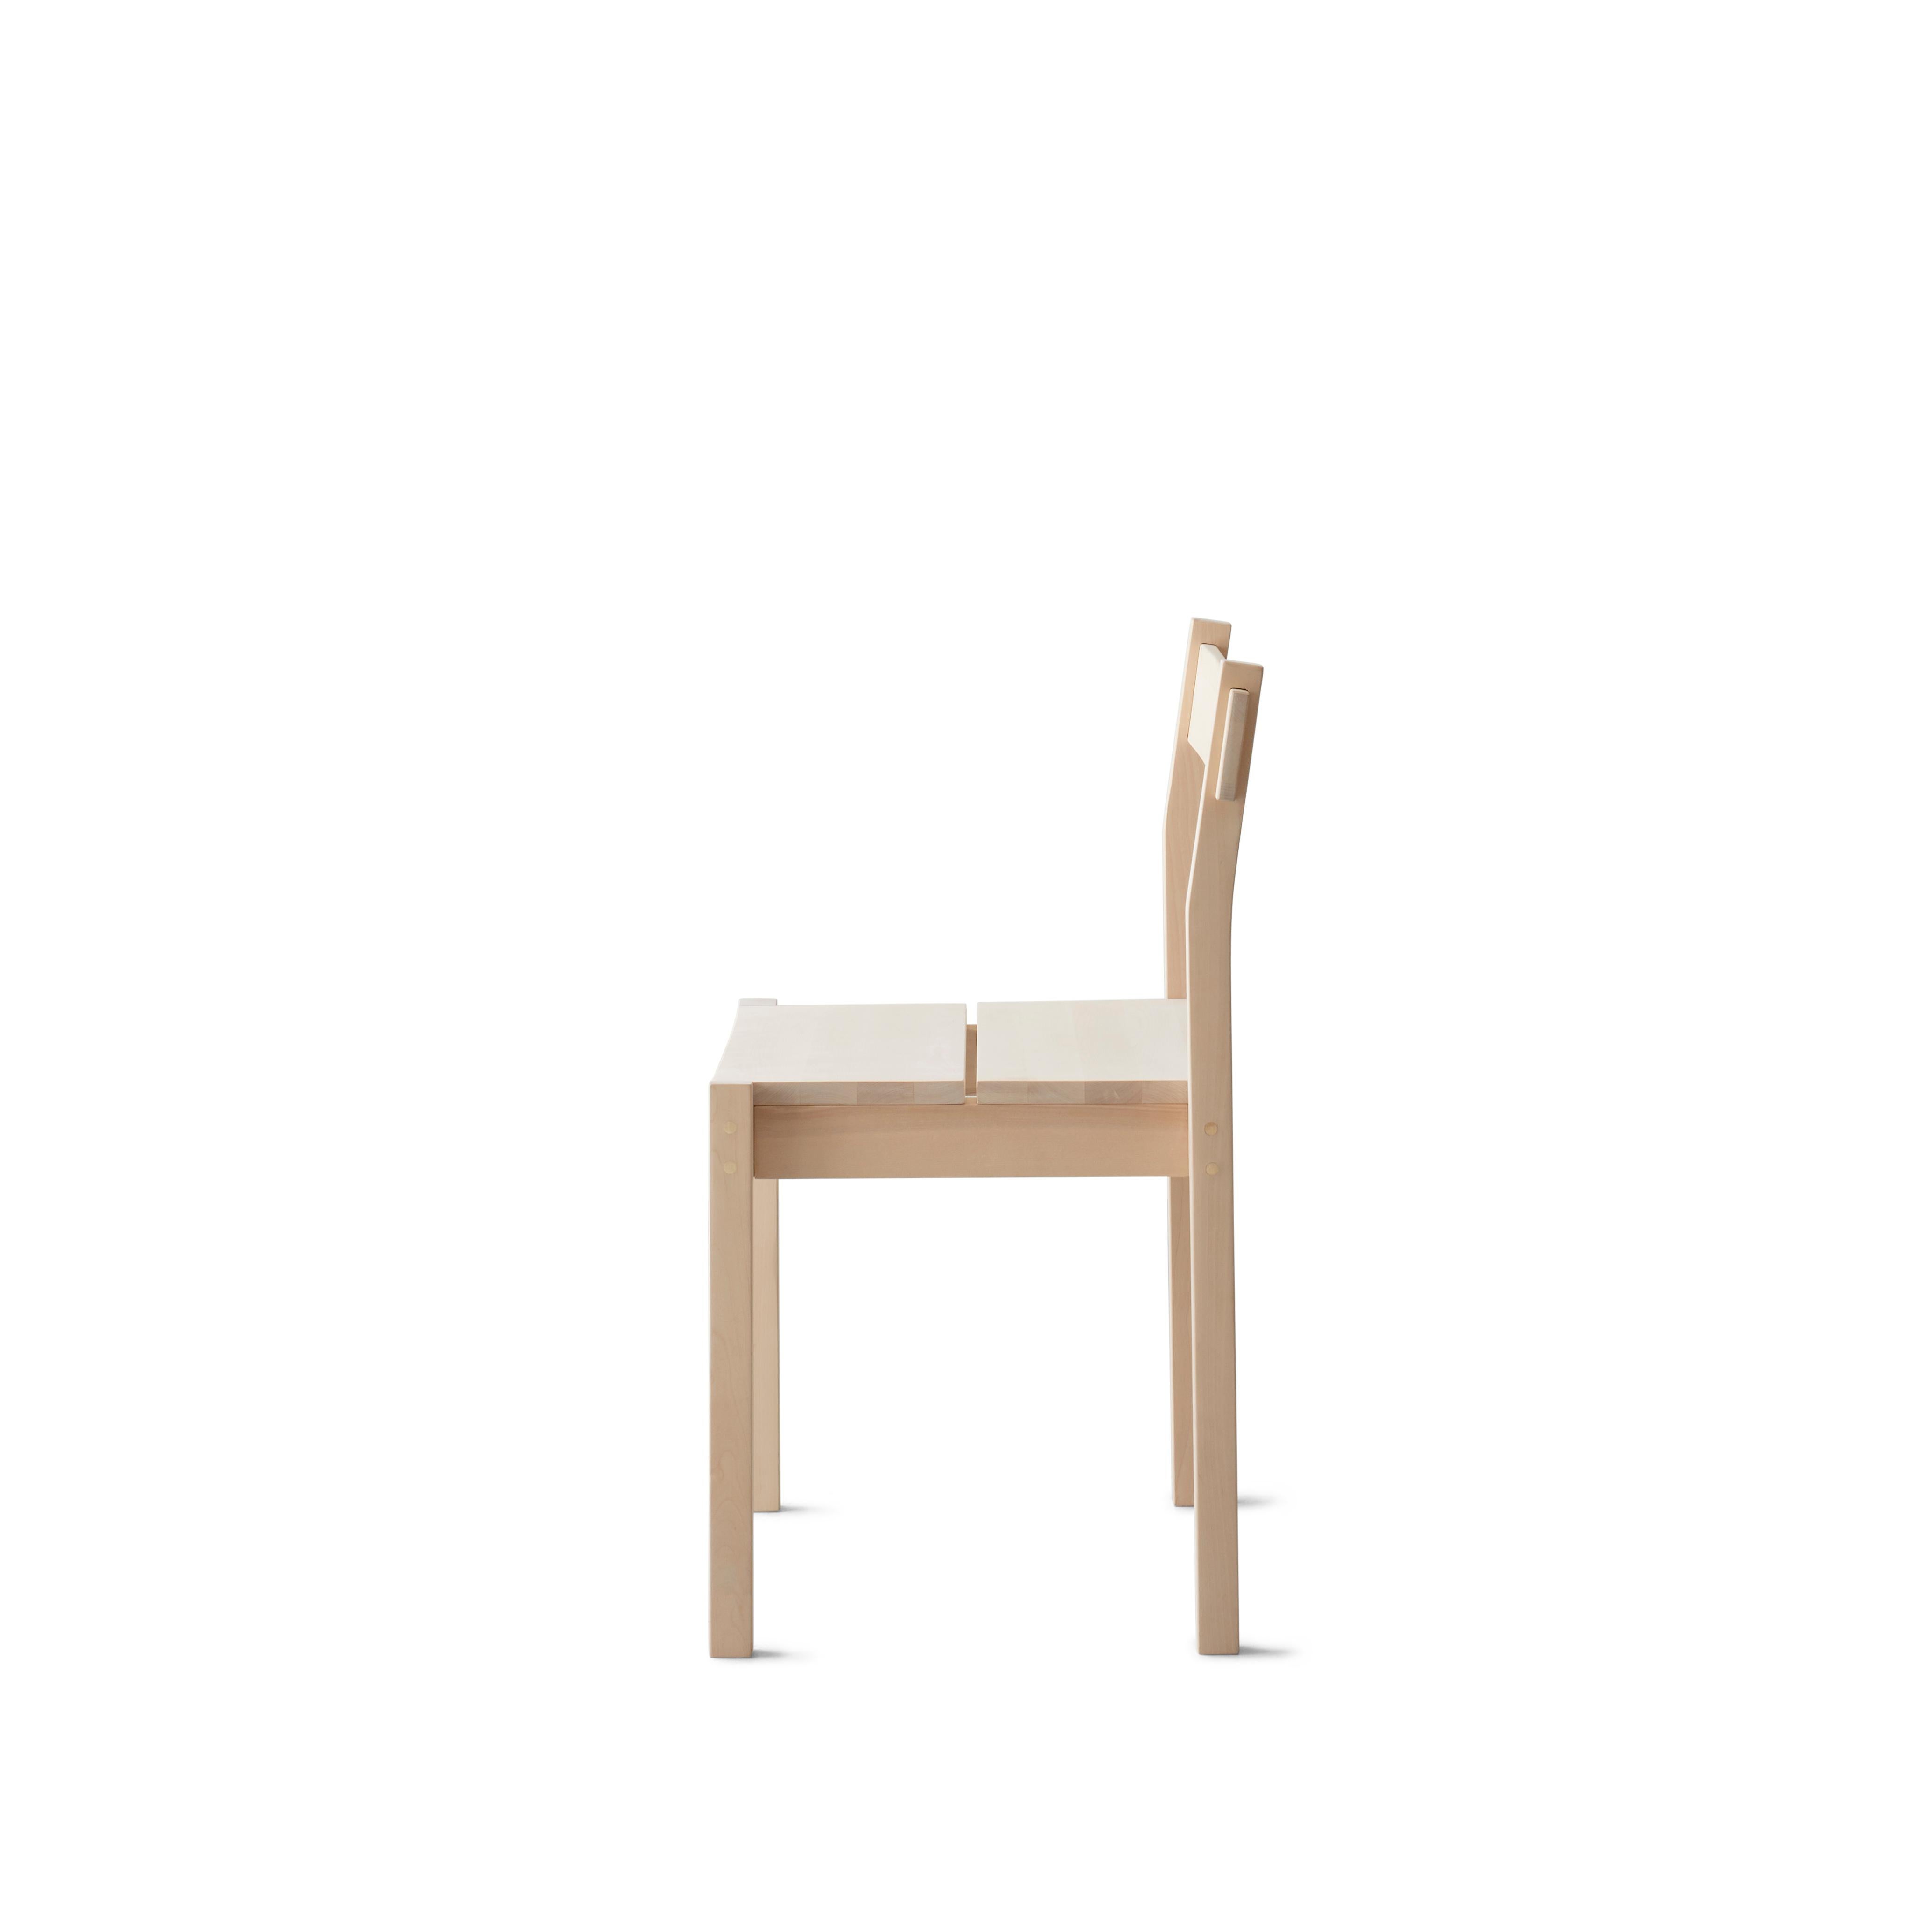 With its almost caricatured design language, Thibault dining chair mimics simplicity in its purest form. Its well-balanced intricacy and confident aesthetic result in a palpable presence. Thibault Dining Chair truly speaks the scandinavian design